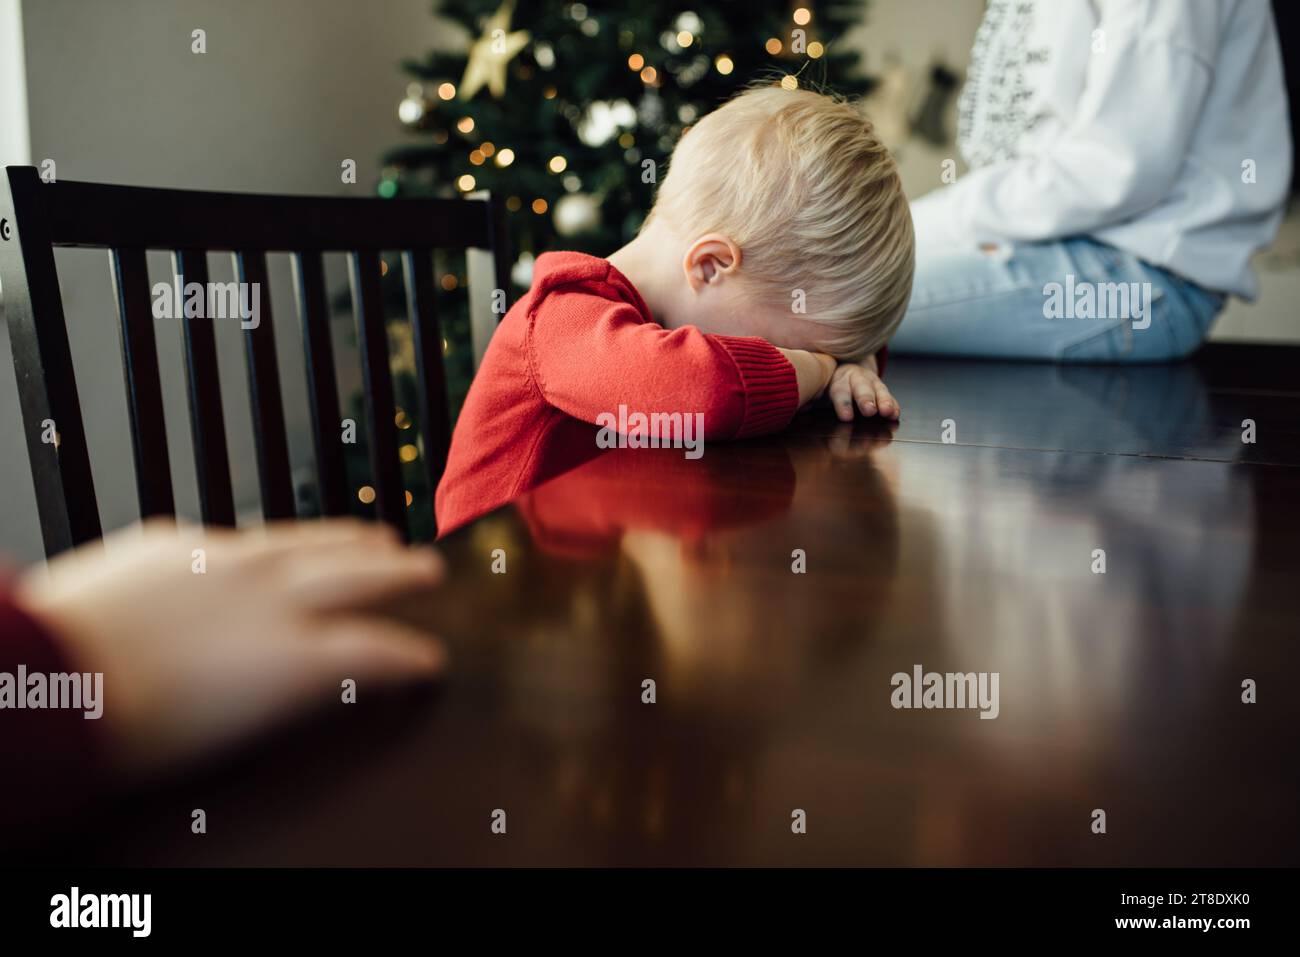 Little boy sits with head down on table pouting in front of Chri Stock Photo